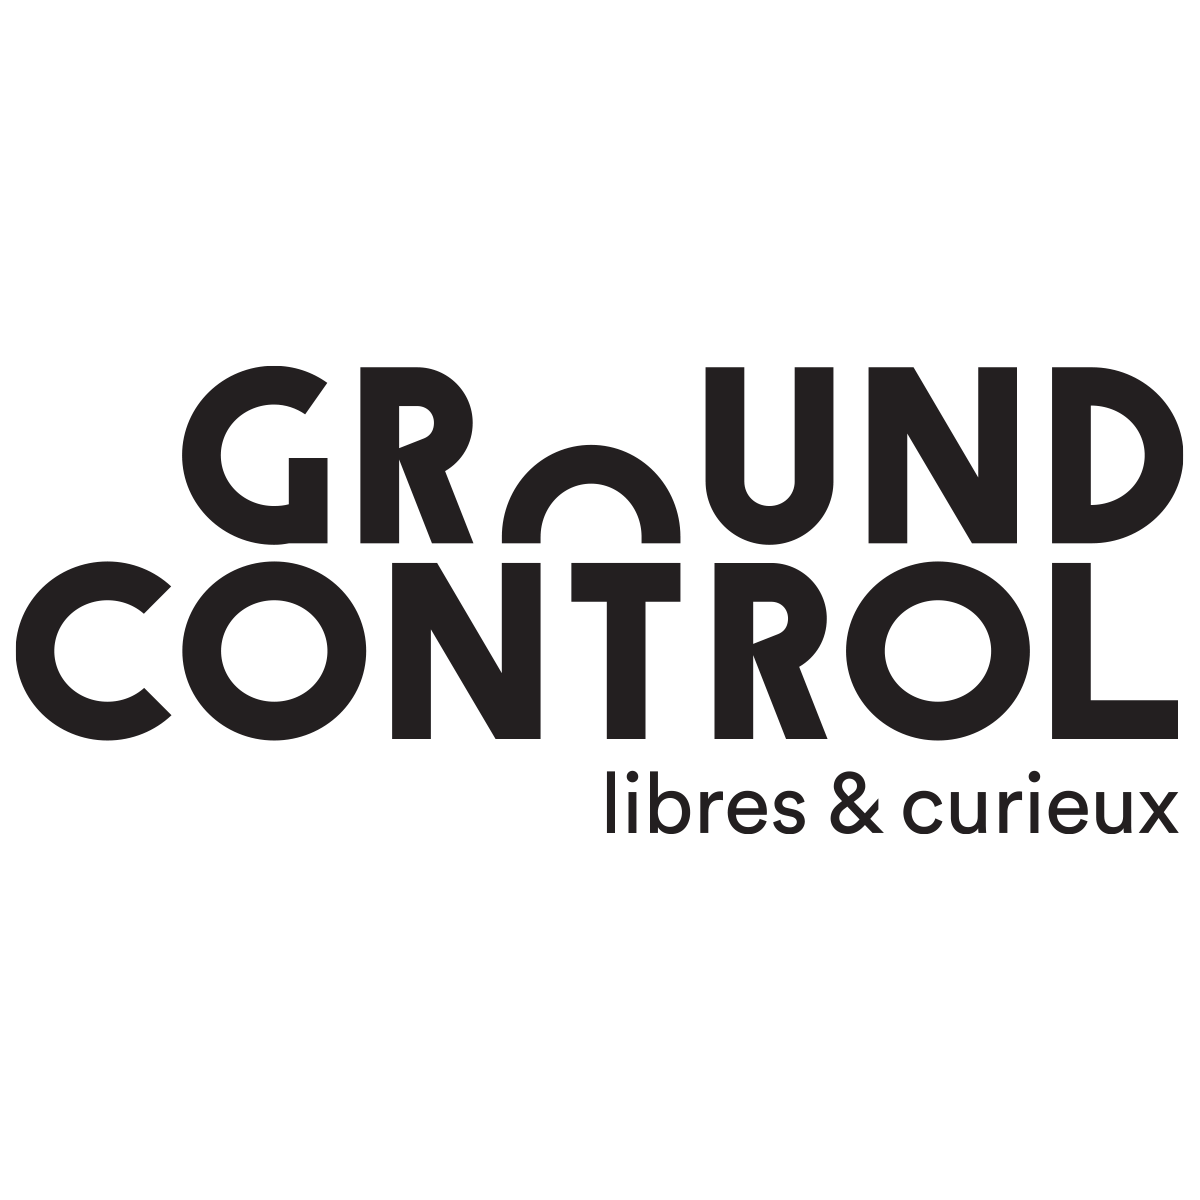 Ground Control - libres & curieux